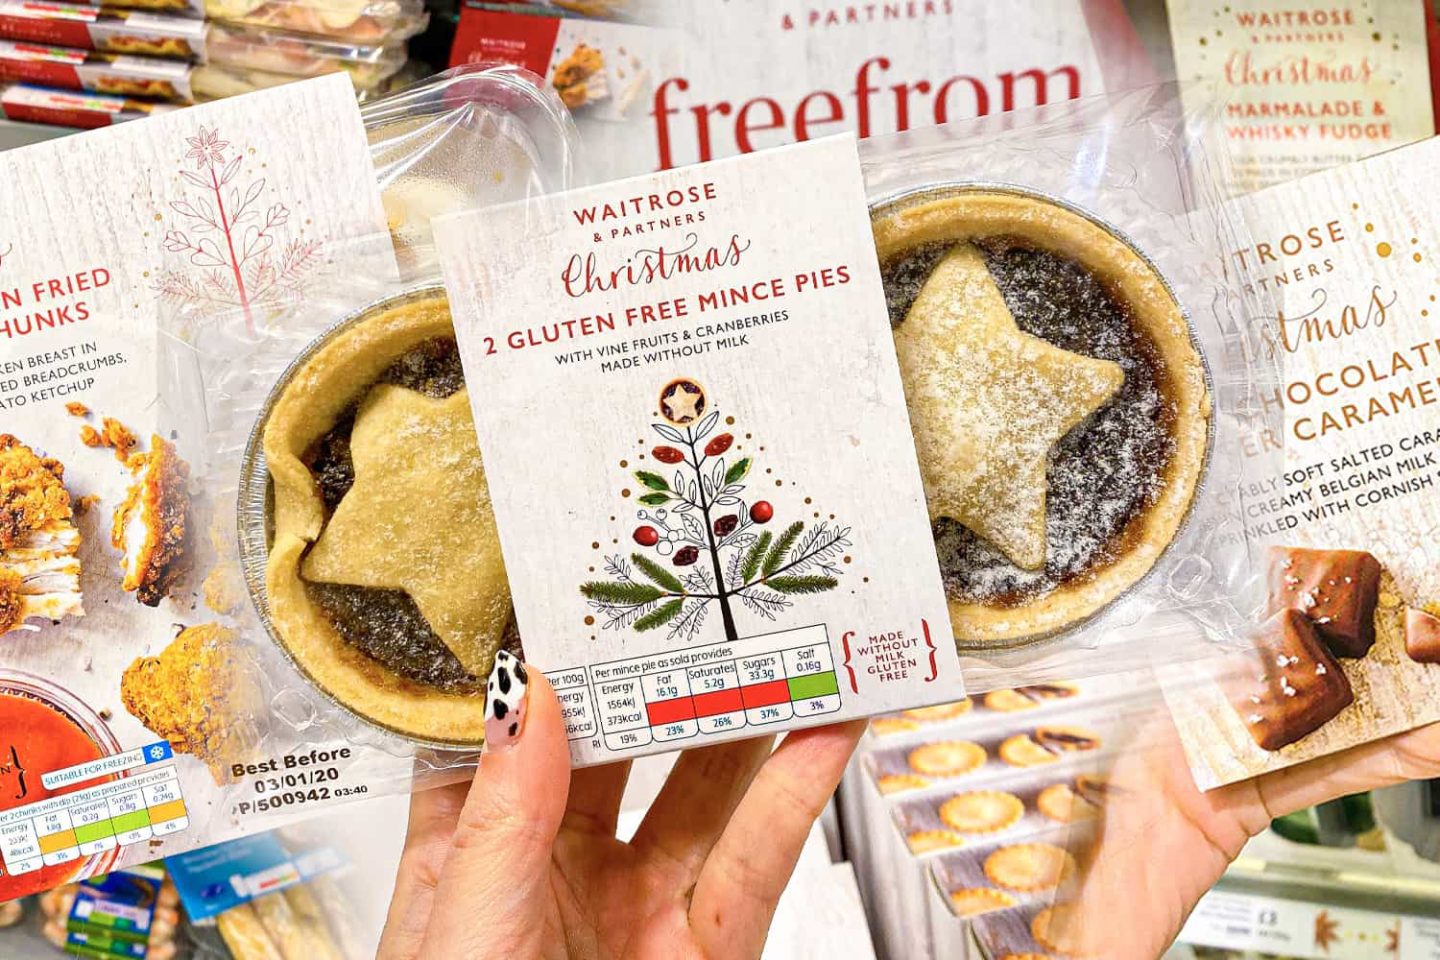 24 NEW products in the Waitrose Gluten Free Christmas Range 2019